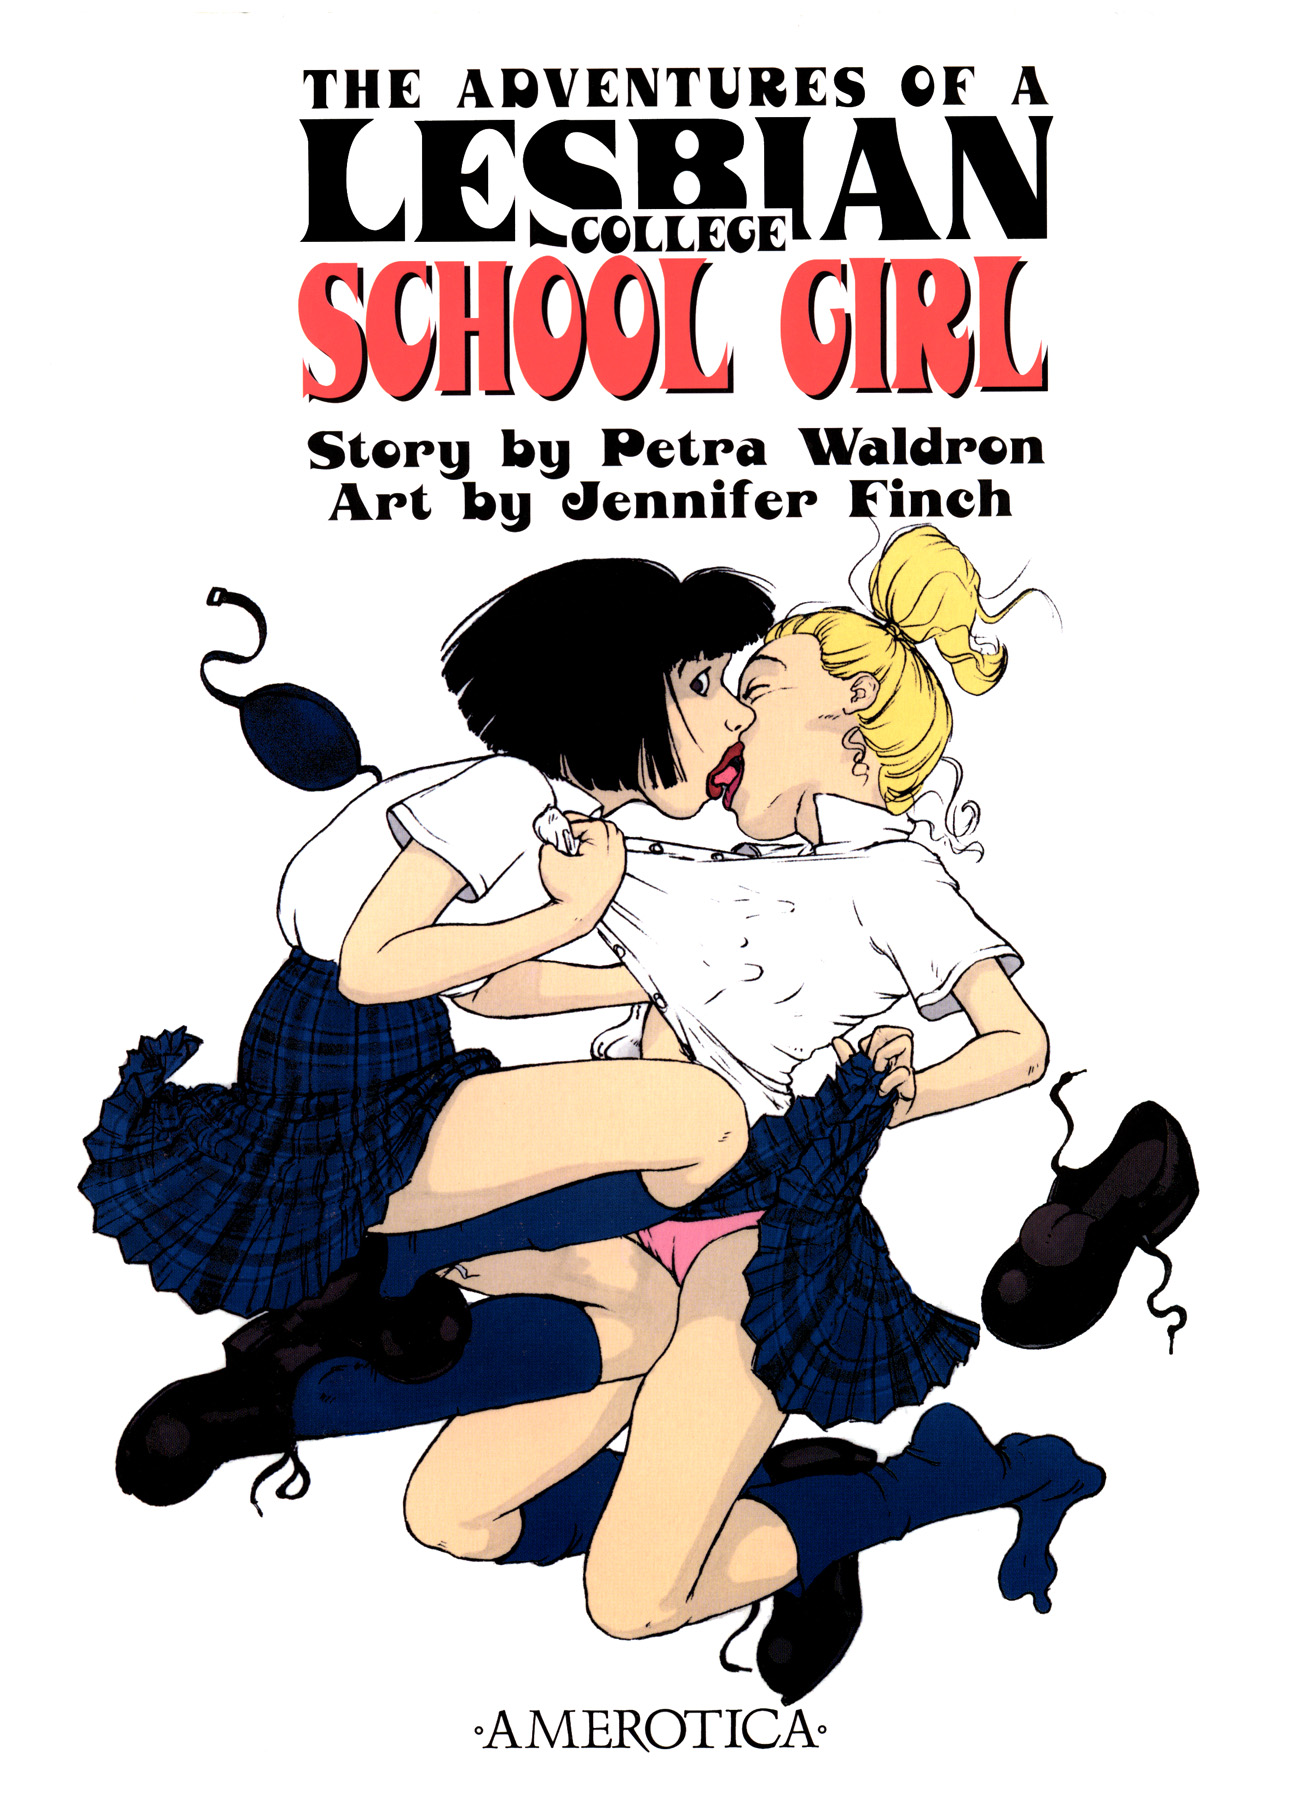 School Girl Xxx And Story - Jennifer Finch] The Adventures of a Lesbian College High School ...